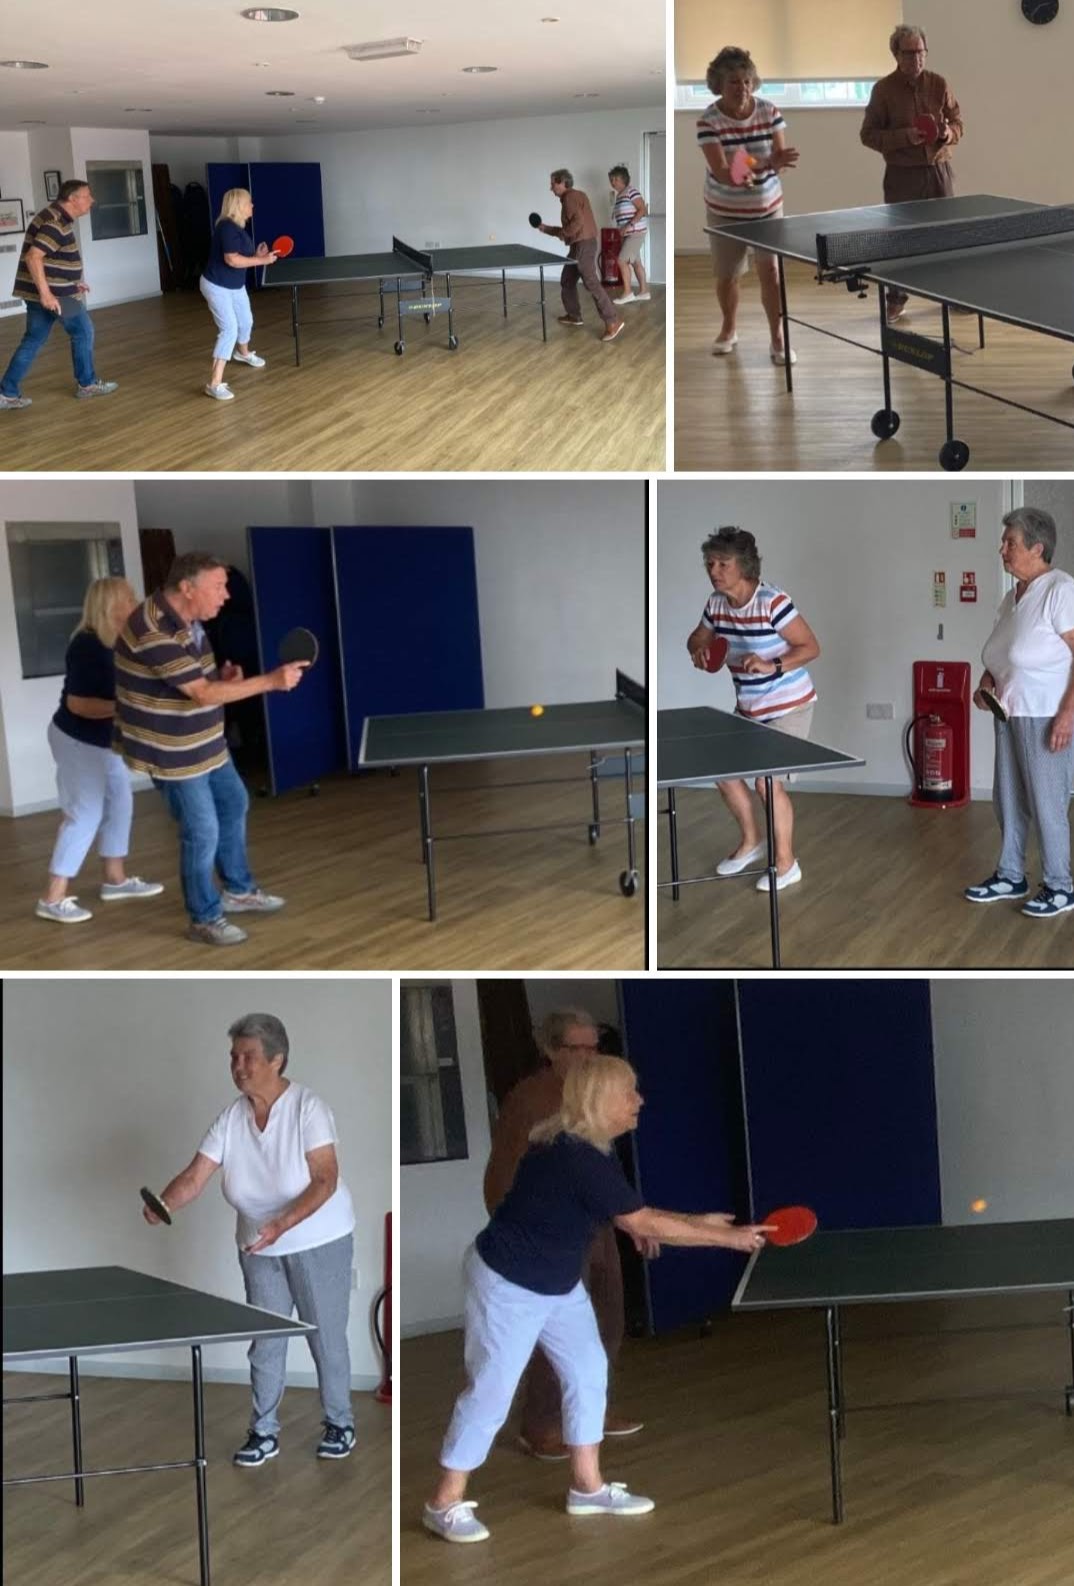 A few of our Table Tennis Group